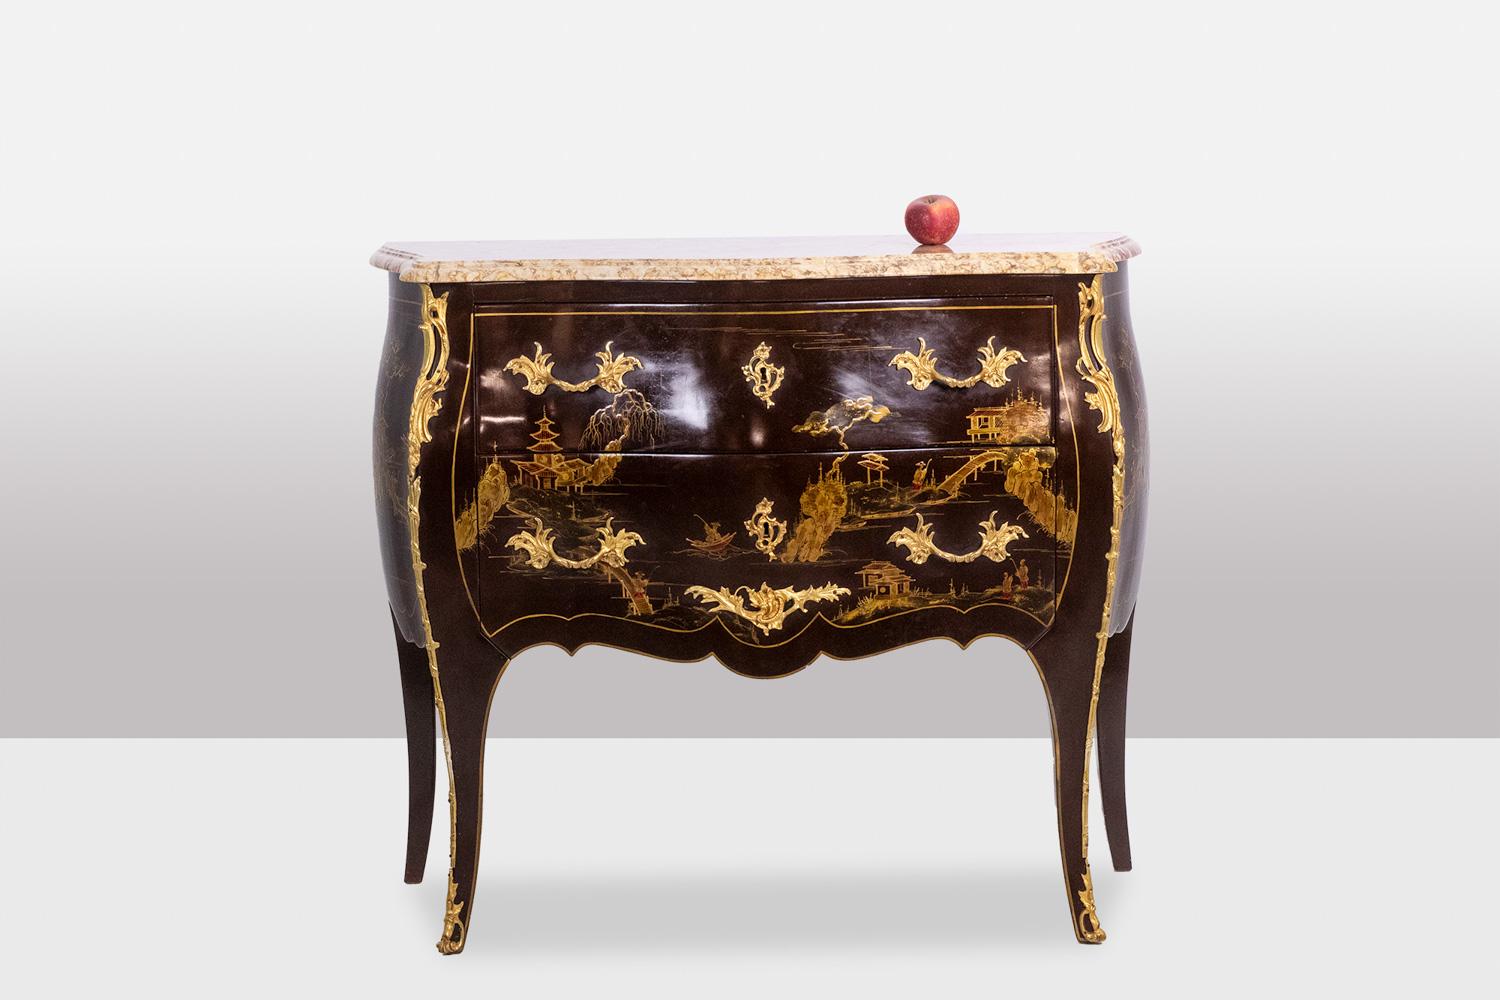 Pair of Louis XV and Asian style “sauteuse” chests of drawers, in lacquer and gilt bronze, with their marble tops, lacquer decorated with landscapes composed of pagodas, trees, bridges, and figures, some figures on boats. Original keys.

French work